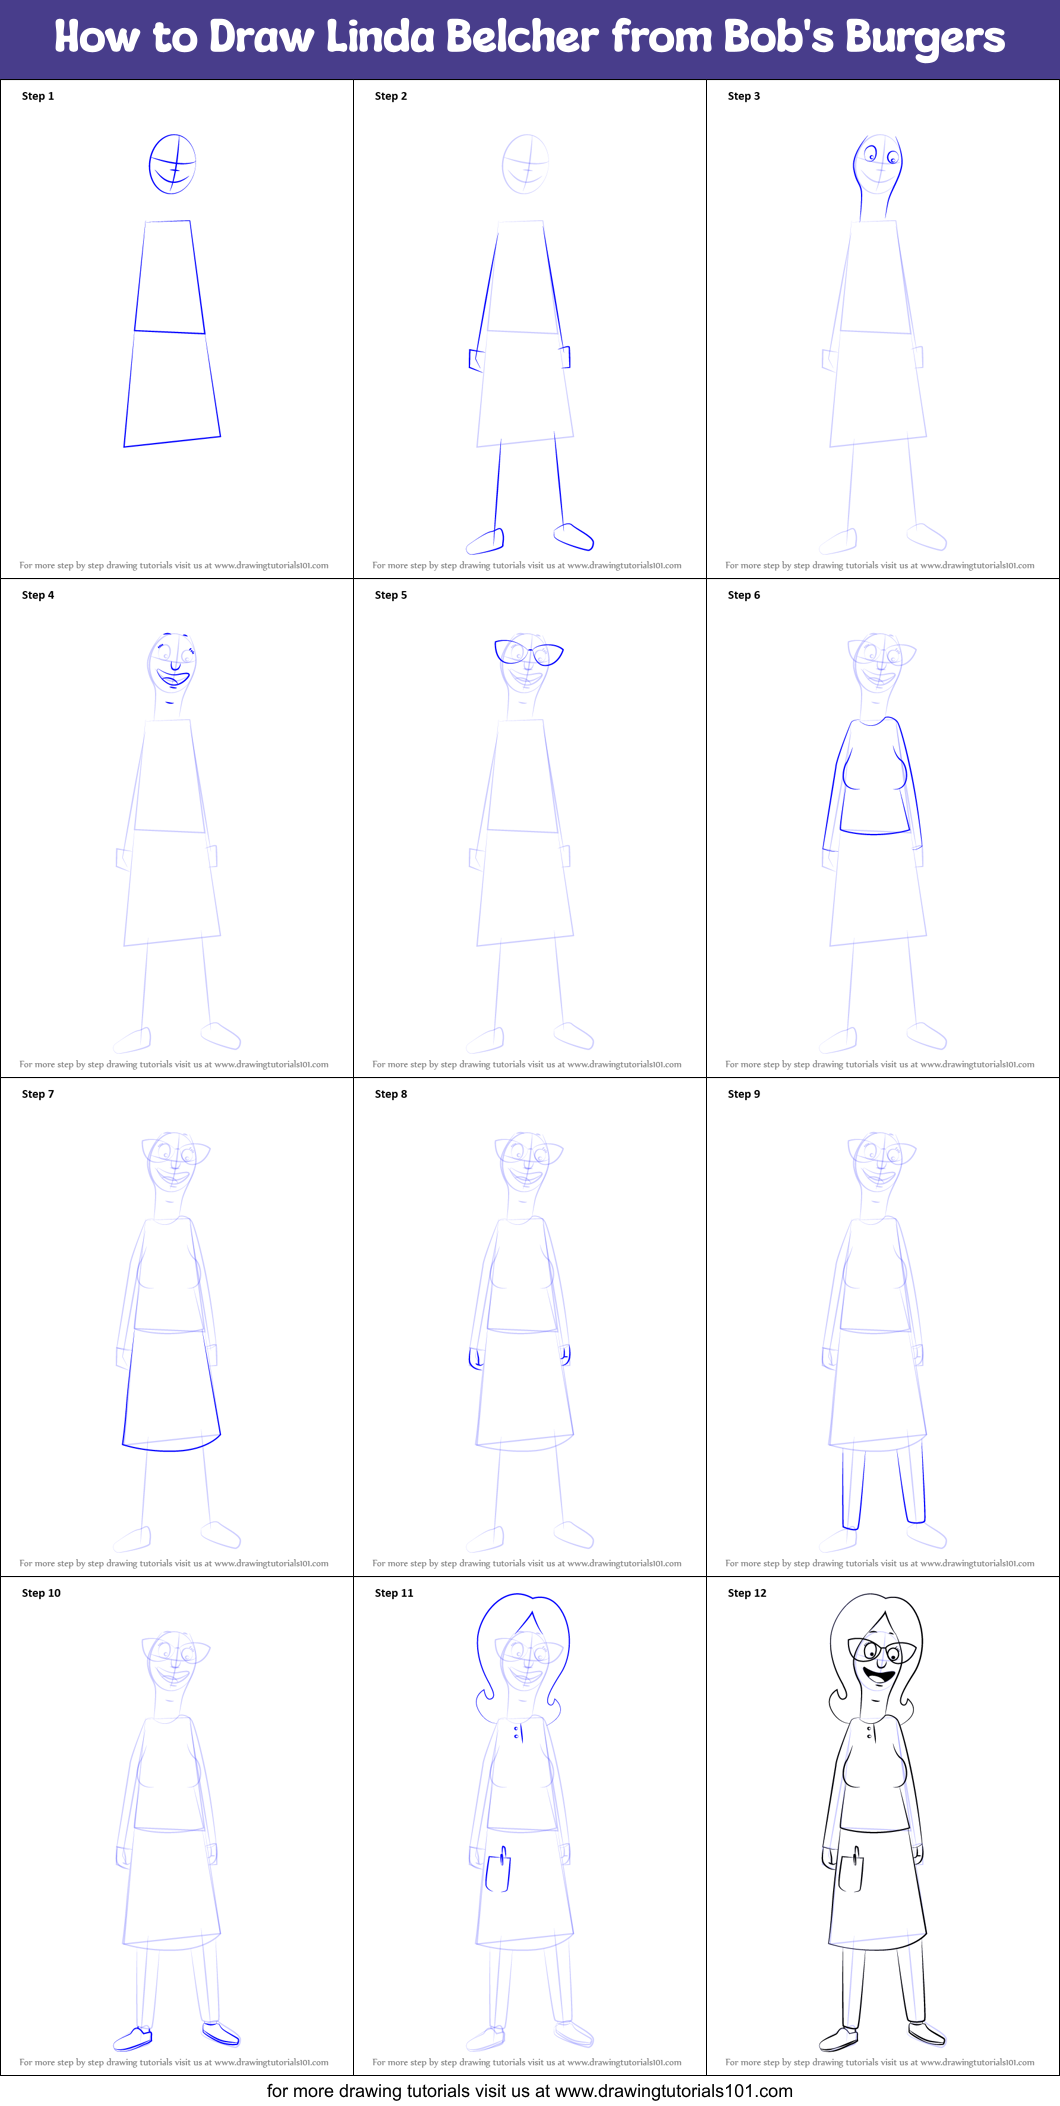 How to Draw Linda Belcher from Bob's Burgers printable step by step